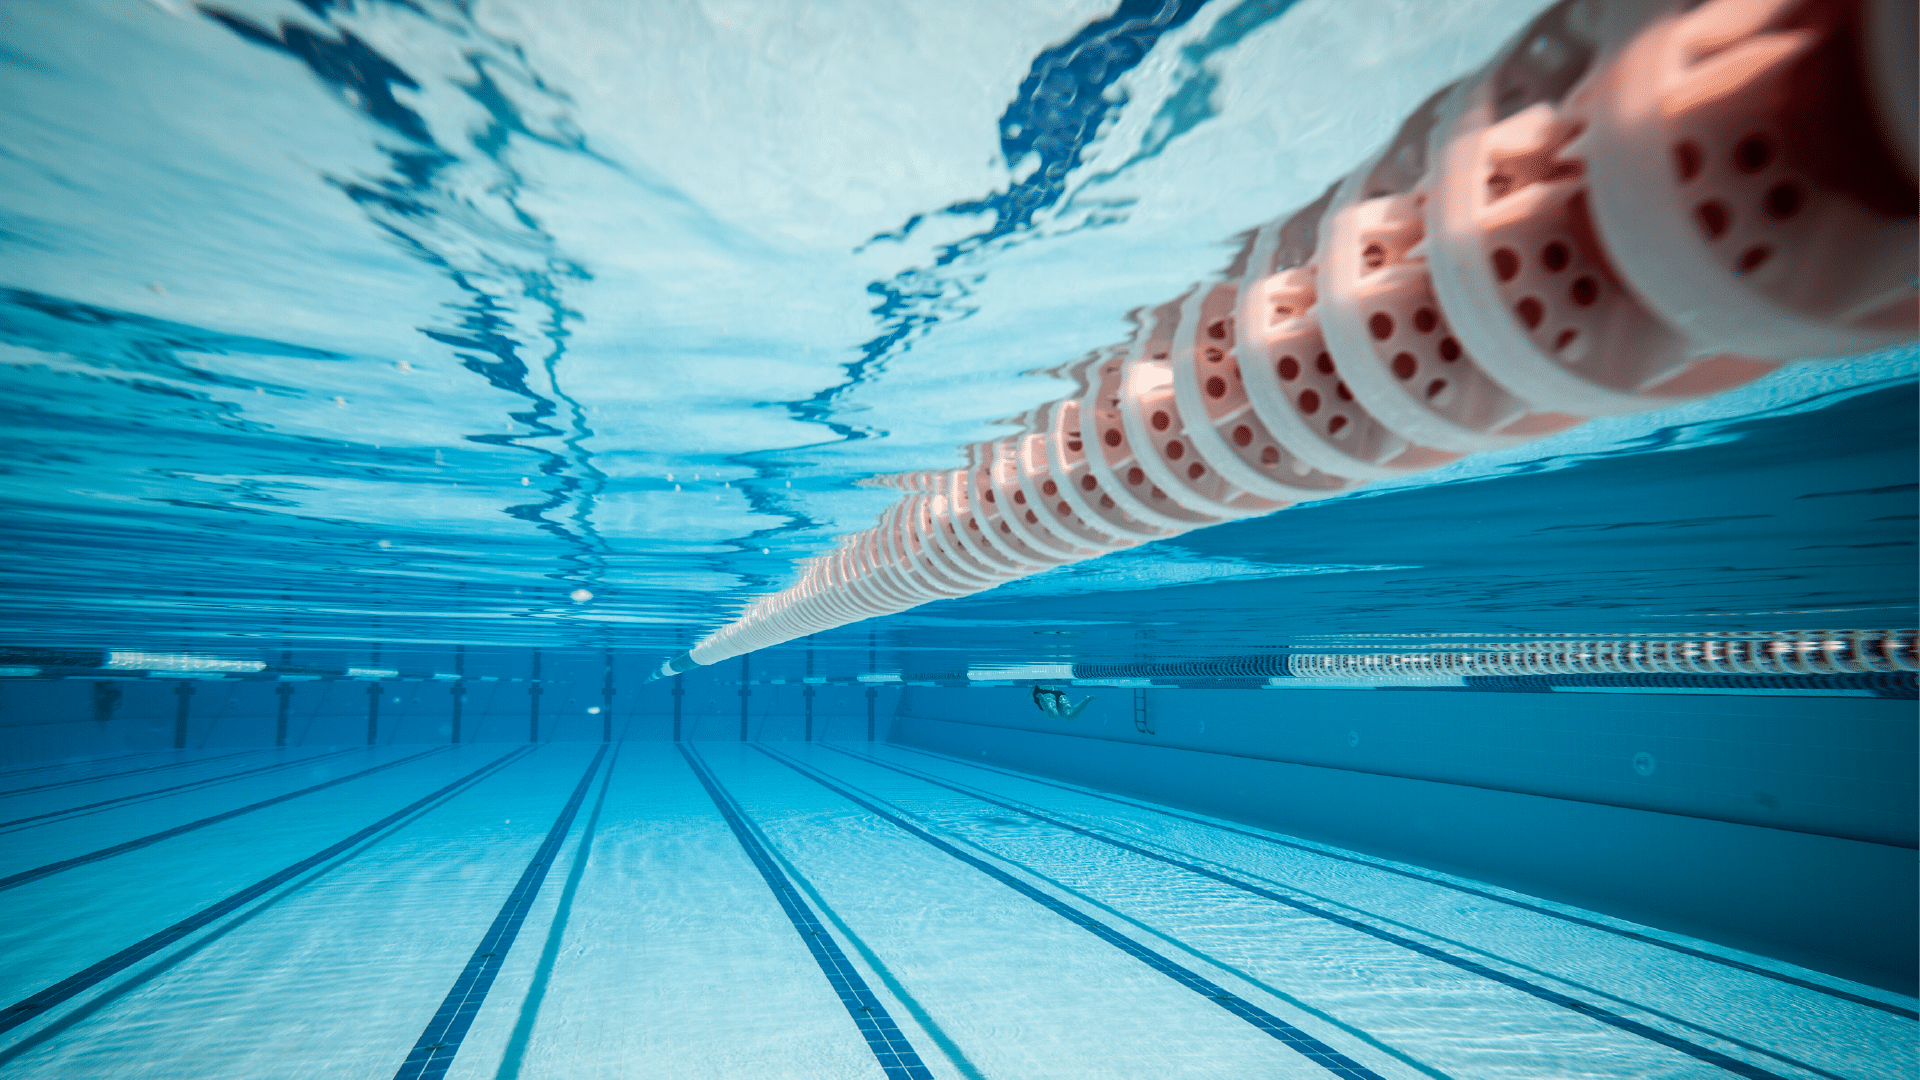 Underwater of a Swimming Pool : Where an AHU is controlling the indoor air quality